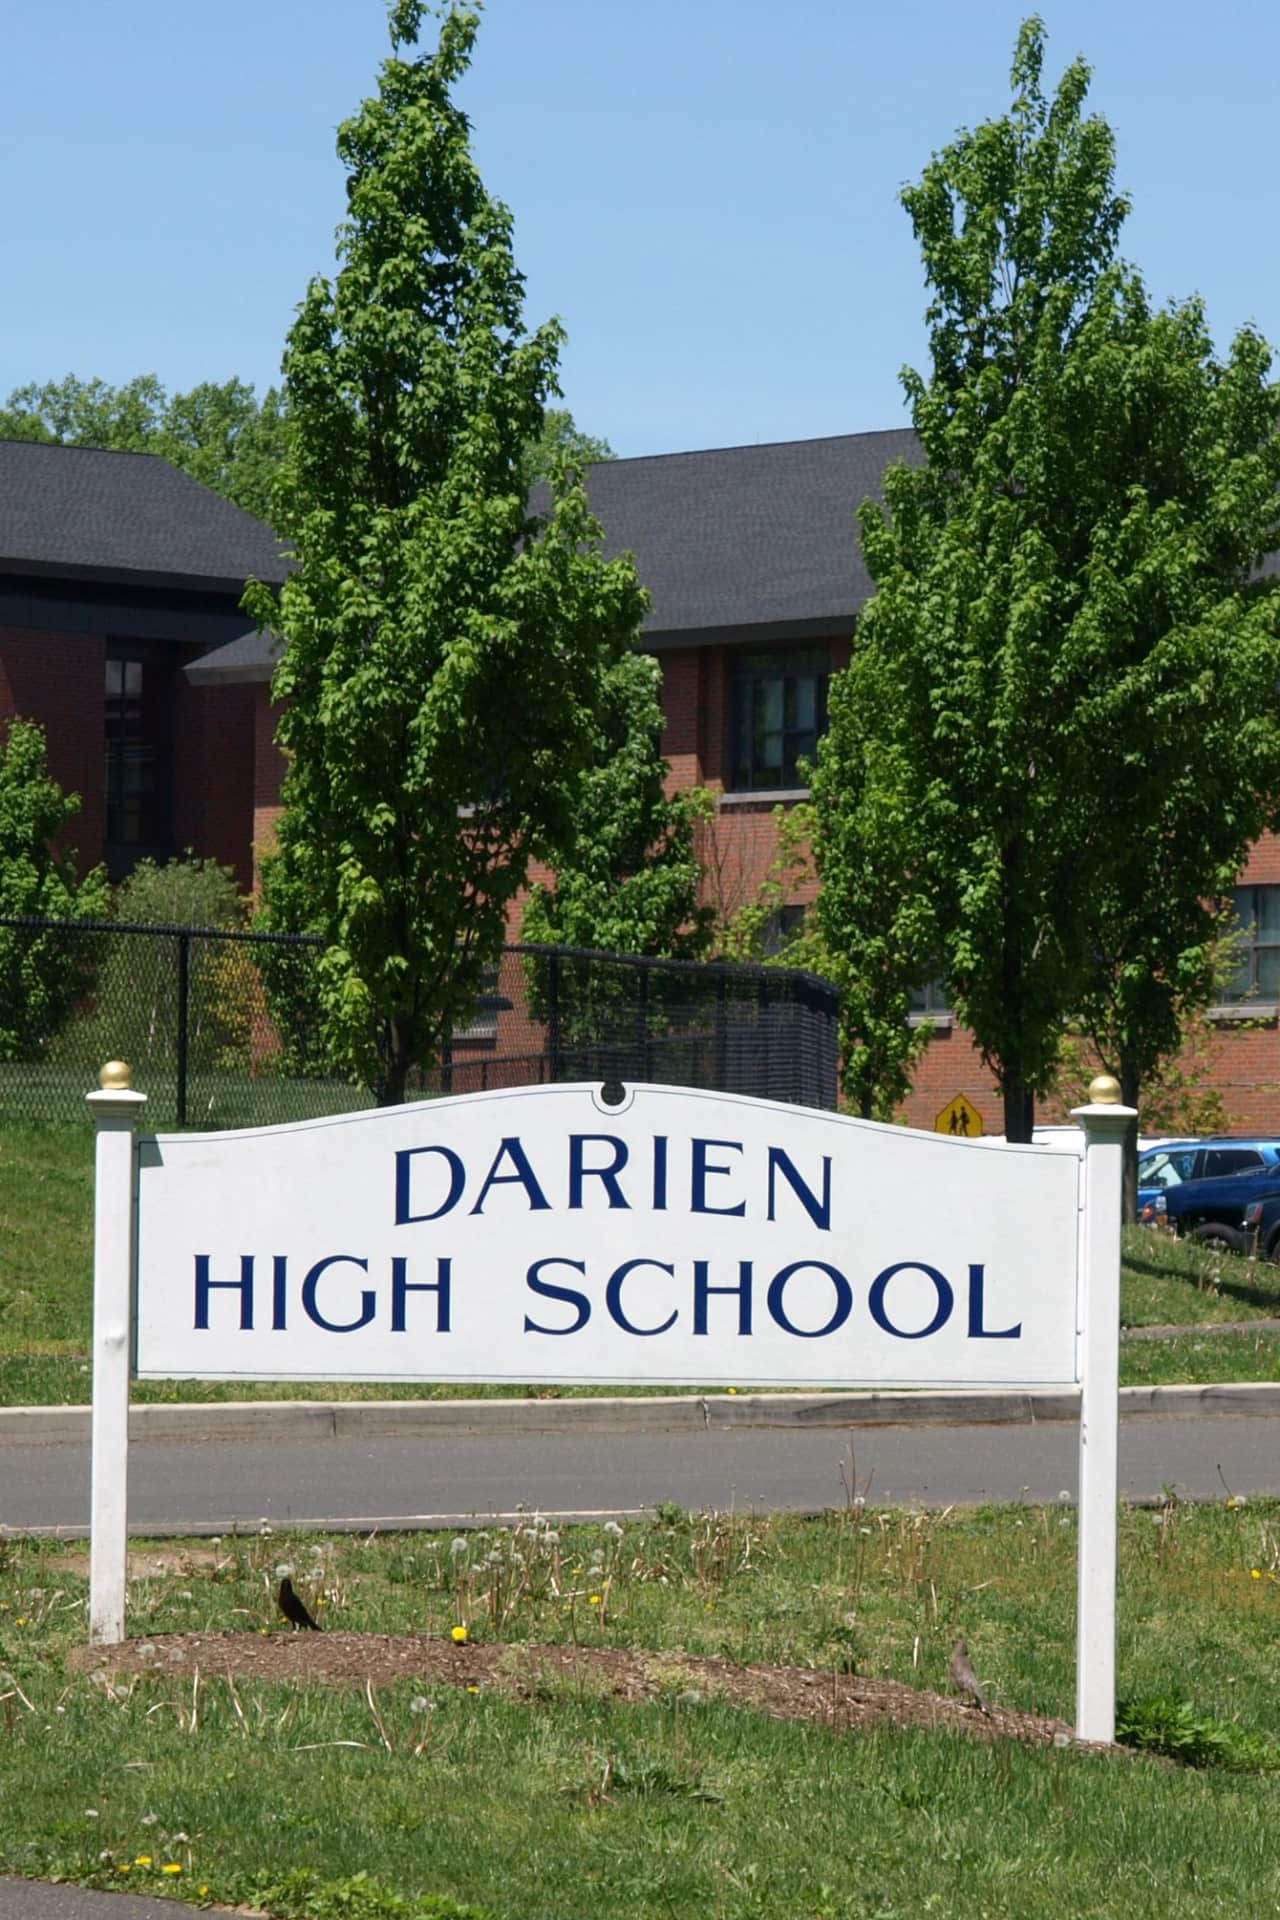 Seven seniors at Darien High School have been named as finalists for the 2014 National Merit Scholarship Program.